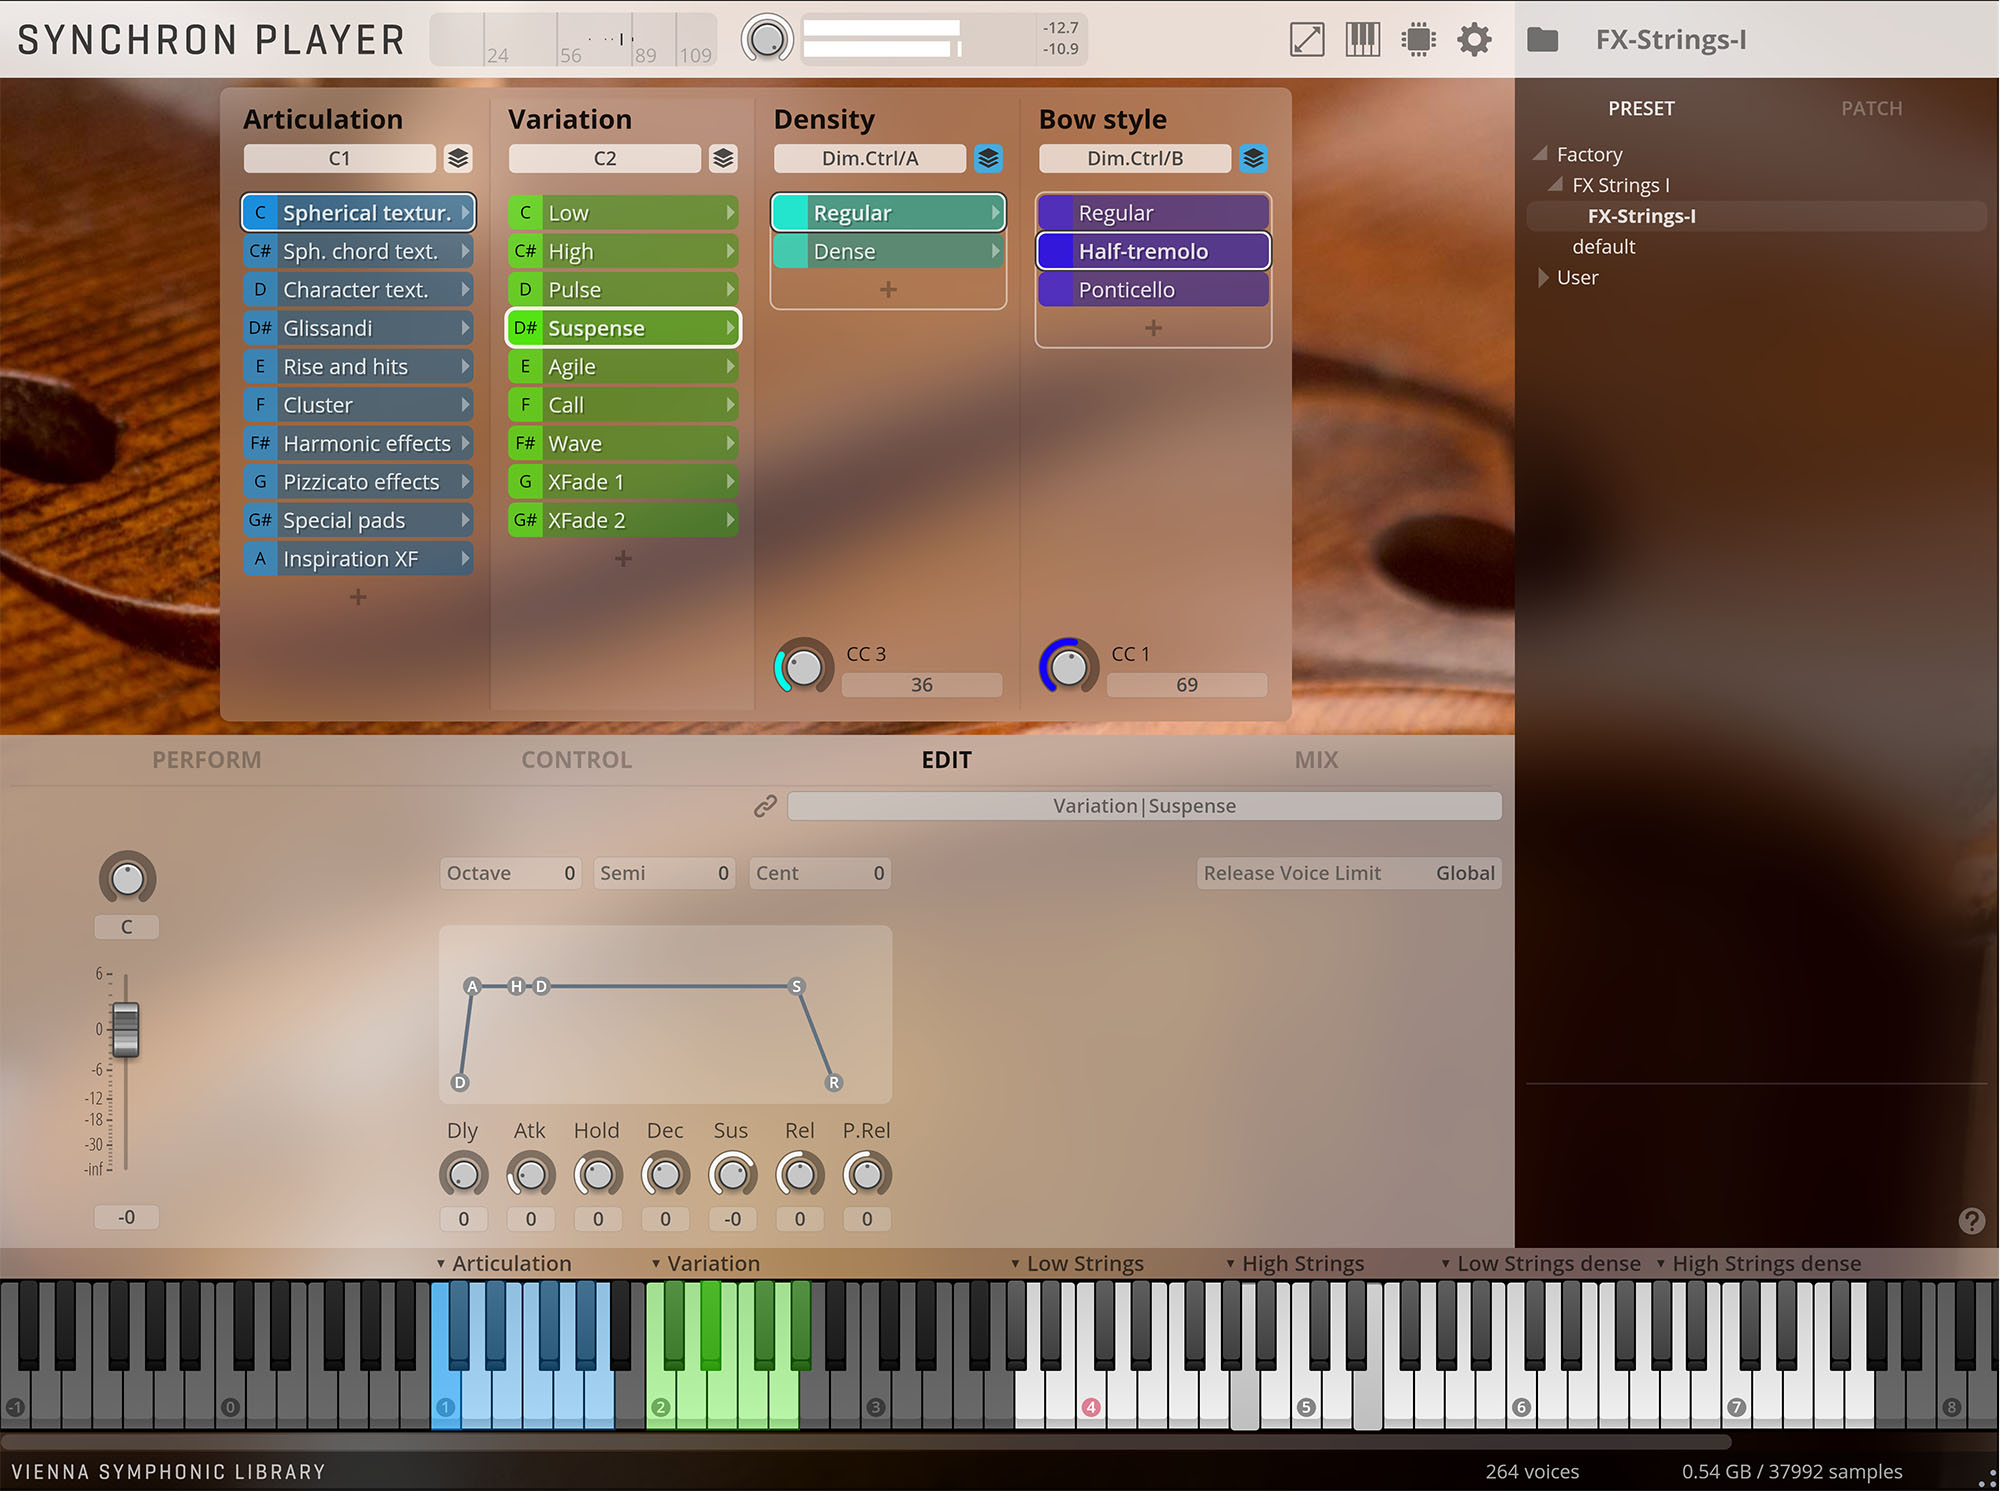 Synchron Player free rompler by Vienna Symphonic Library (VSL)